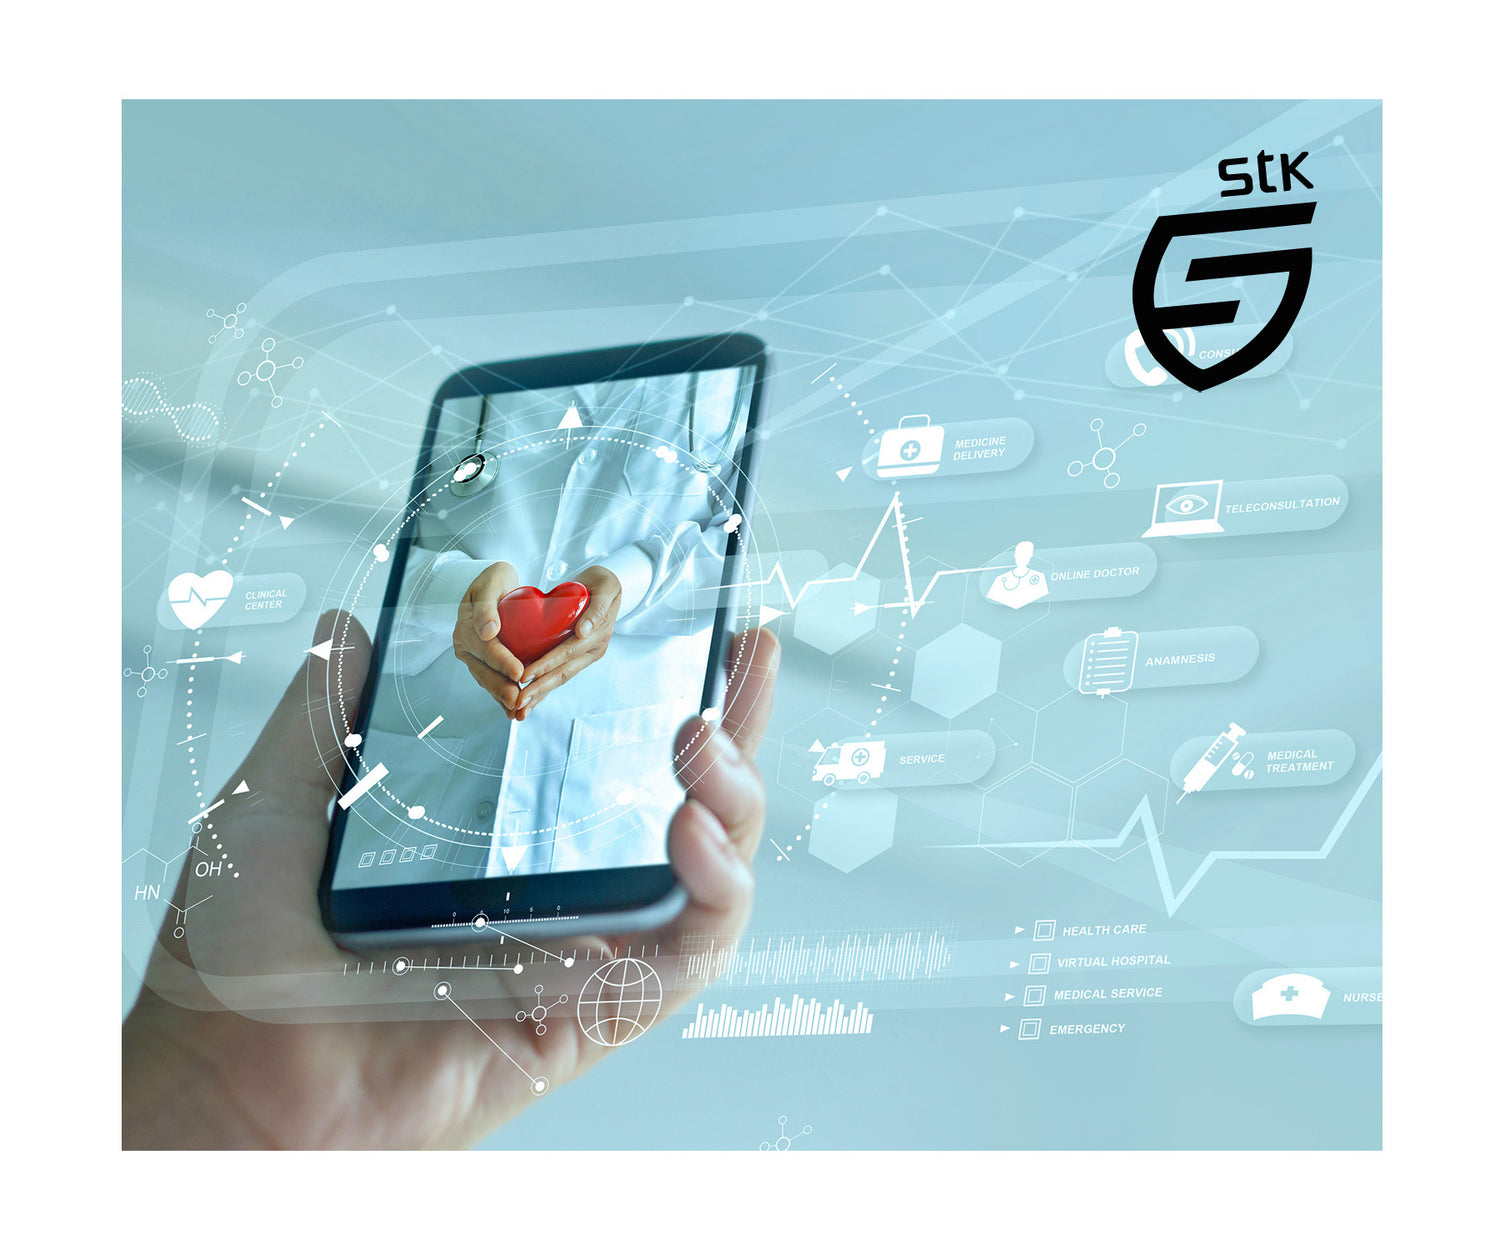 Image of Health Smartphone and the STK Logo and Emblem